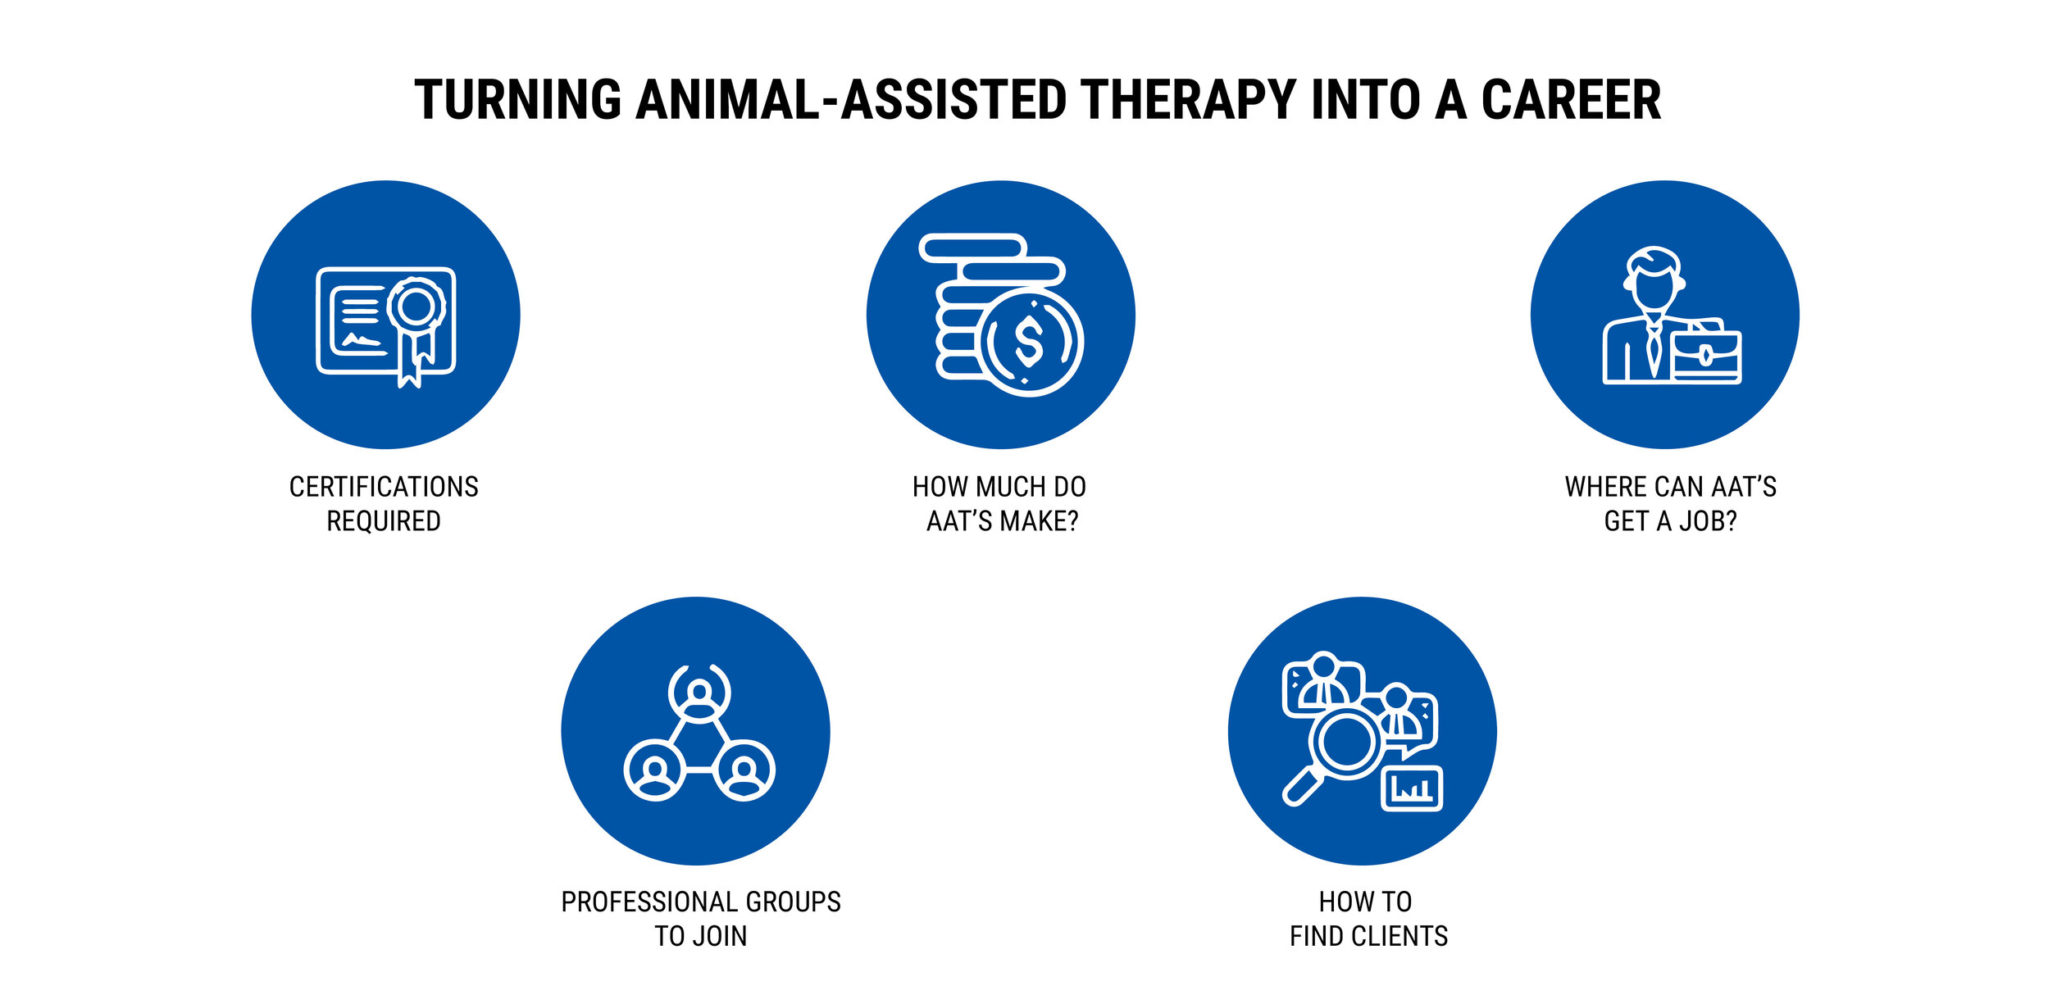 TURNING ANIMAL-ASSISTED THERAPY INTO A CAREER